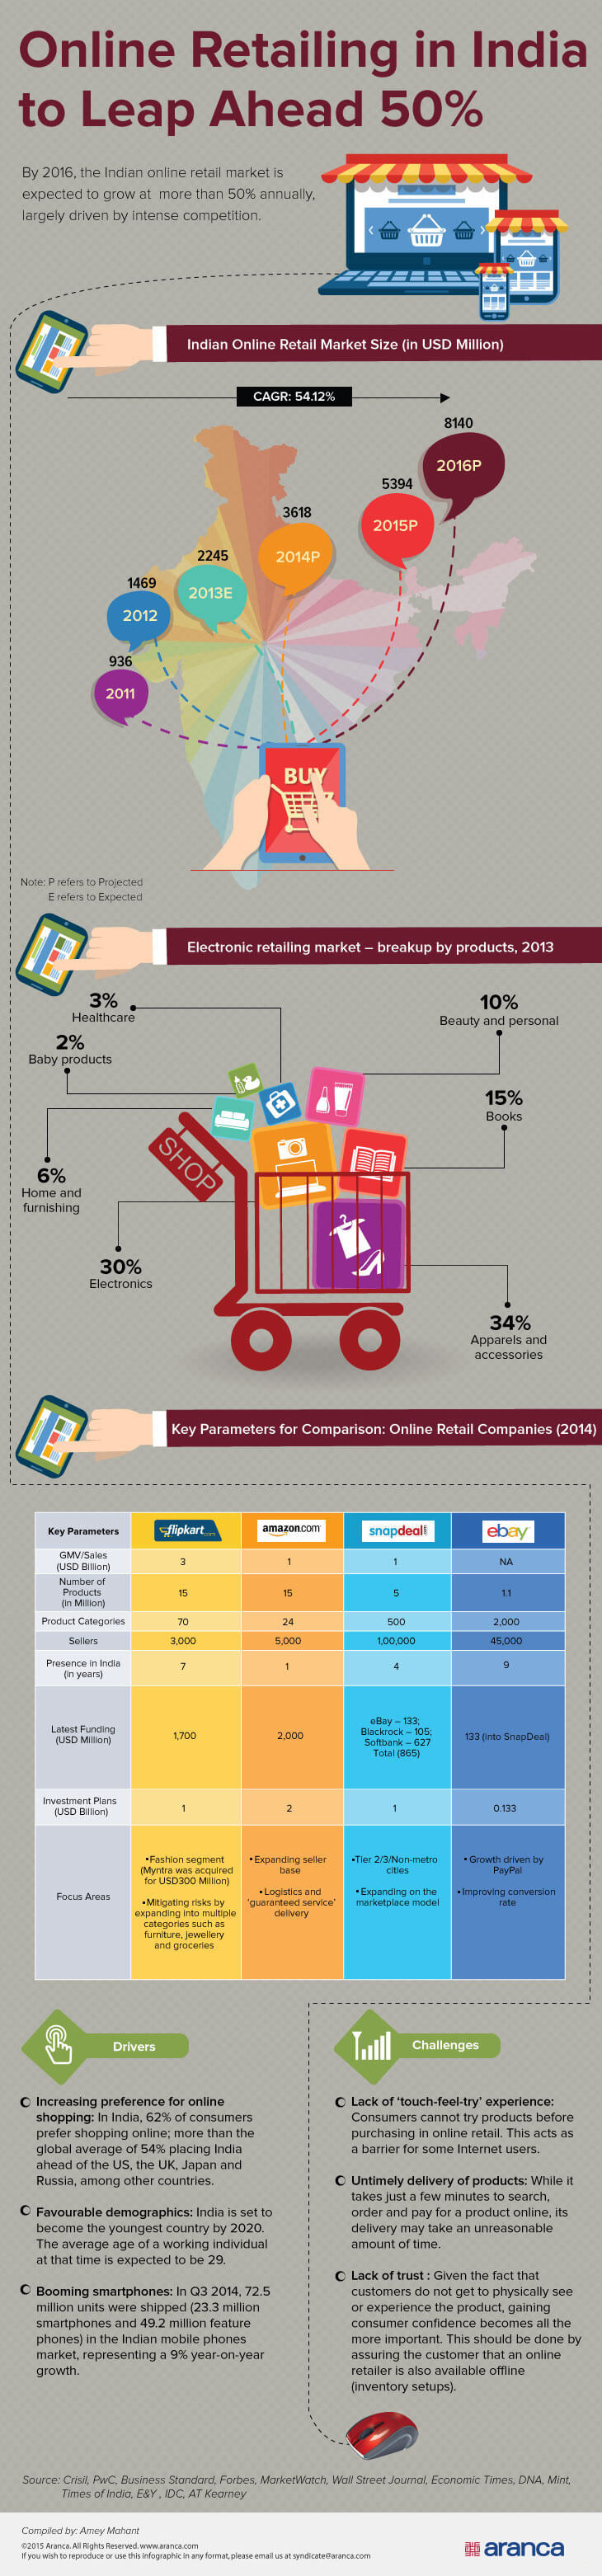 Online Retail Market in India to Leap Ahead 50%